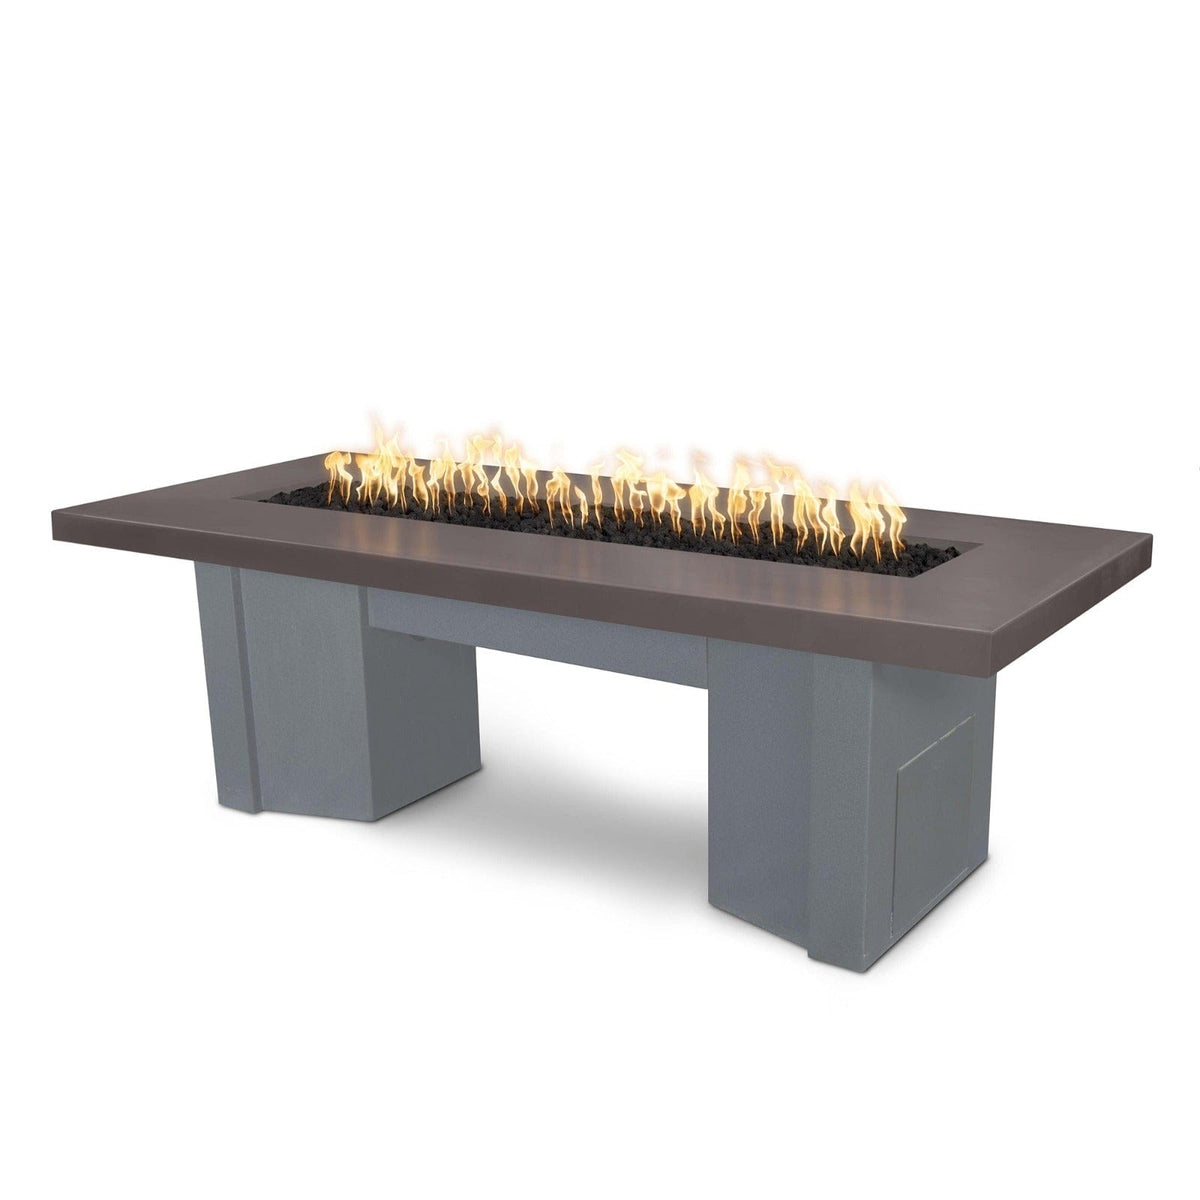 The Outdoor Plus Fire Features Chestnut (-CST) / Gray Powder Coated Steel (-GRY) The Outdoor Plus 60&quot; Alameda Fire Table Smooth Concrete in Liquid Propane - 12V Electronic Ignition / OPT-ALMGFRC60E12V-LP